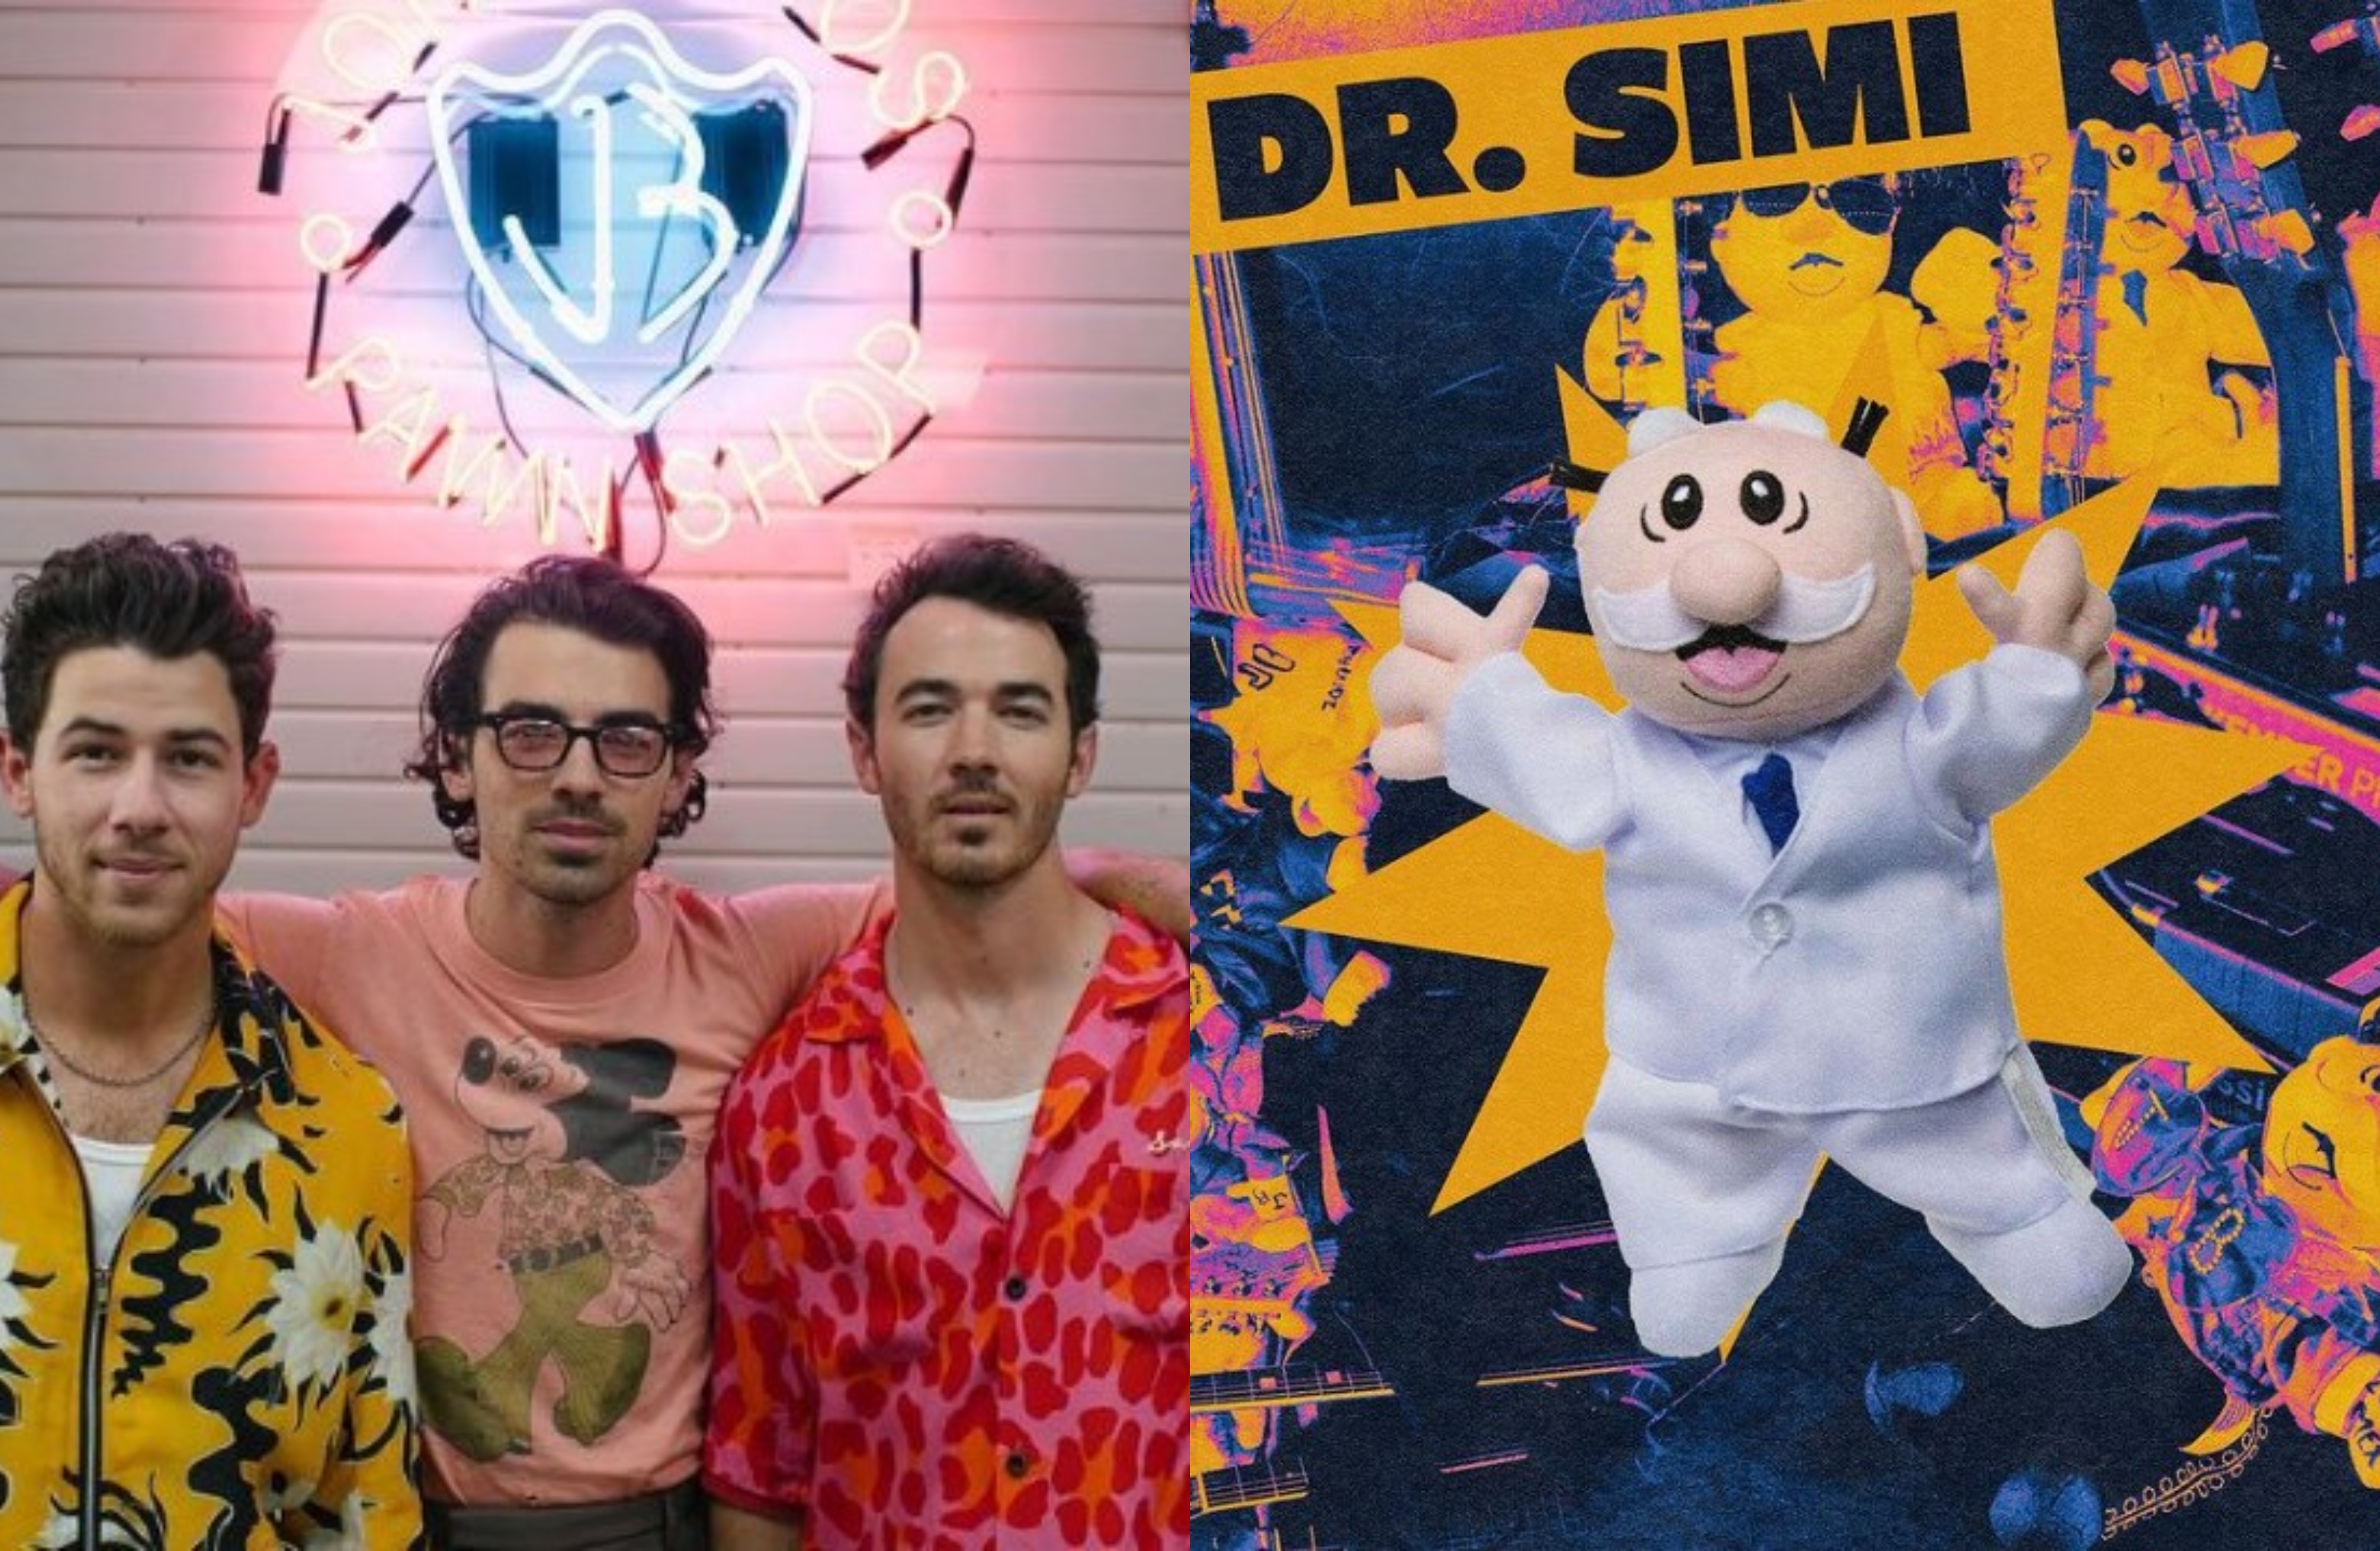 Although "despised" the dolls launched by their fans, the Jonas Brothers recognized Dr. Simi as a cultural icon (Photo: Instagram)